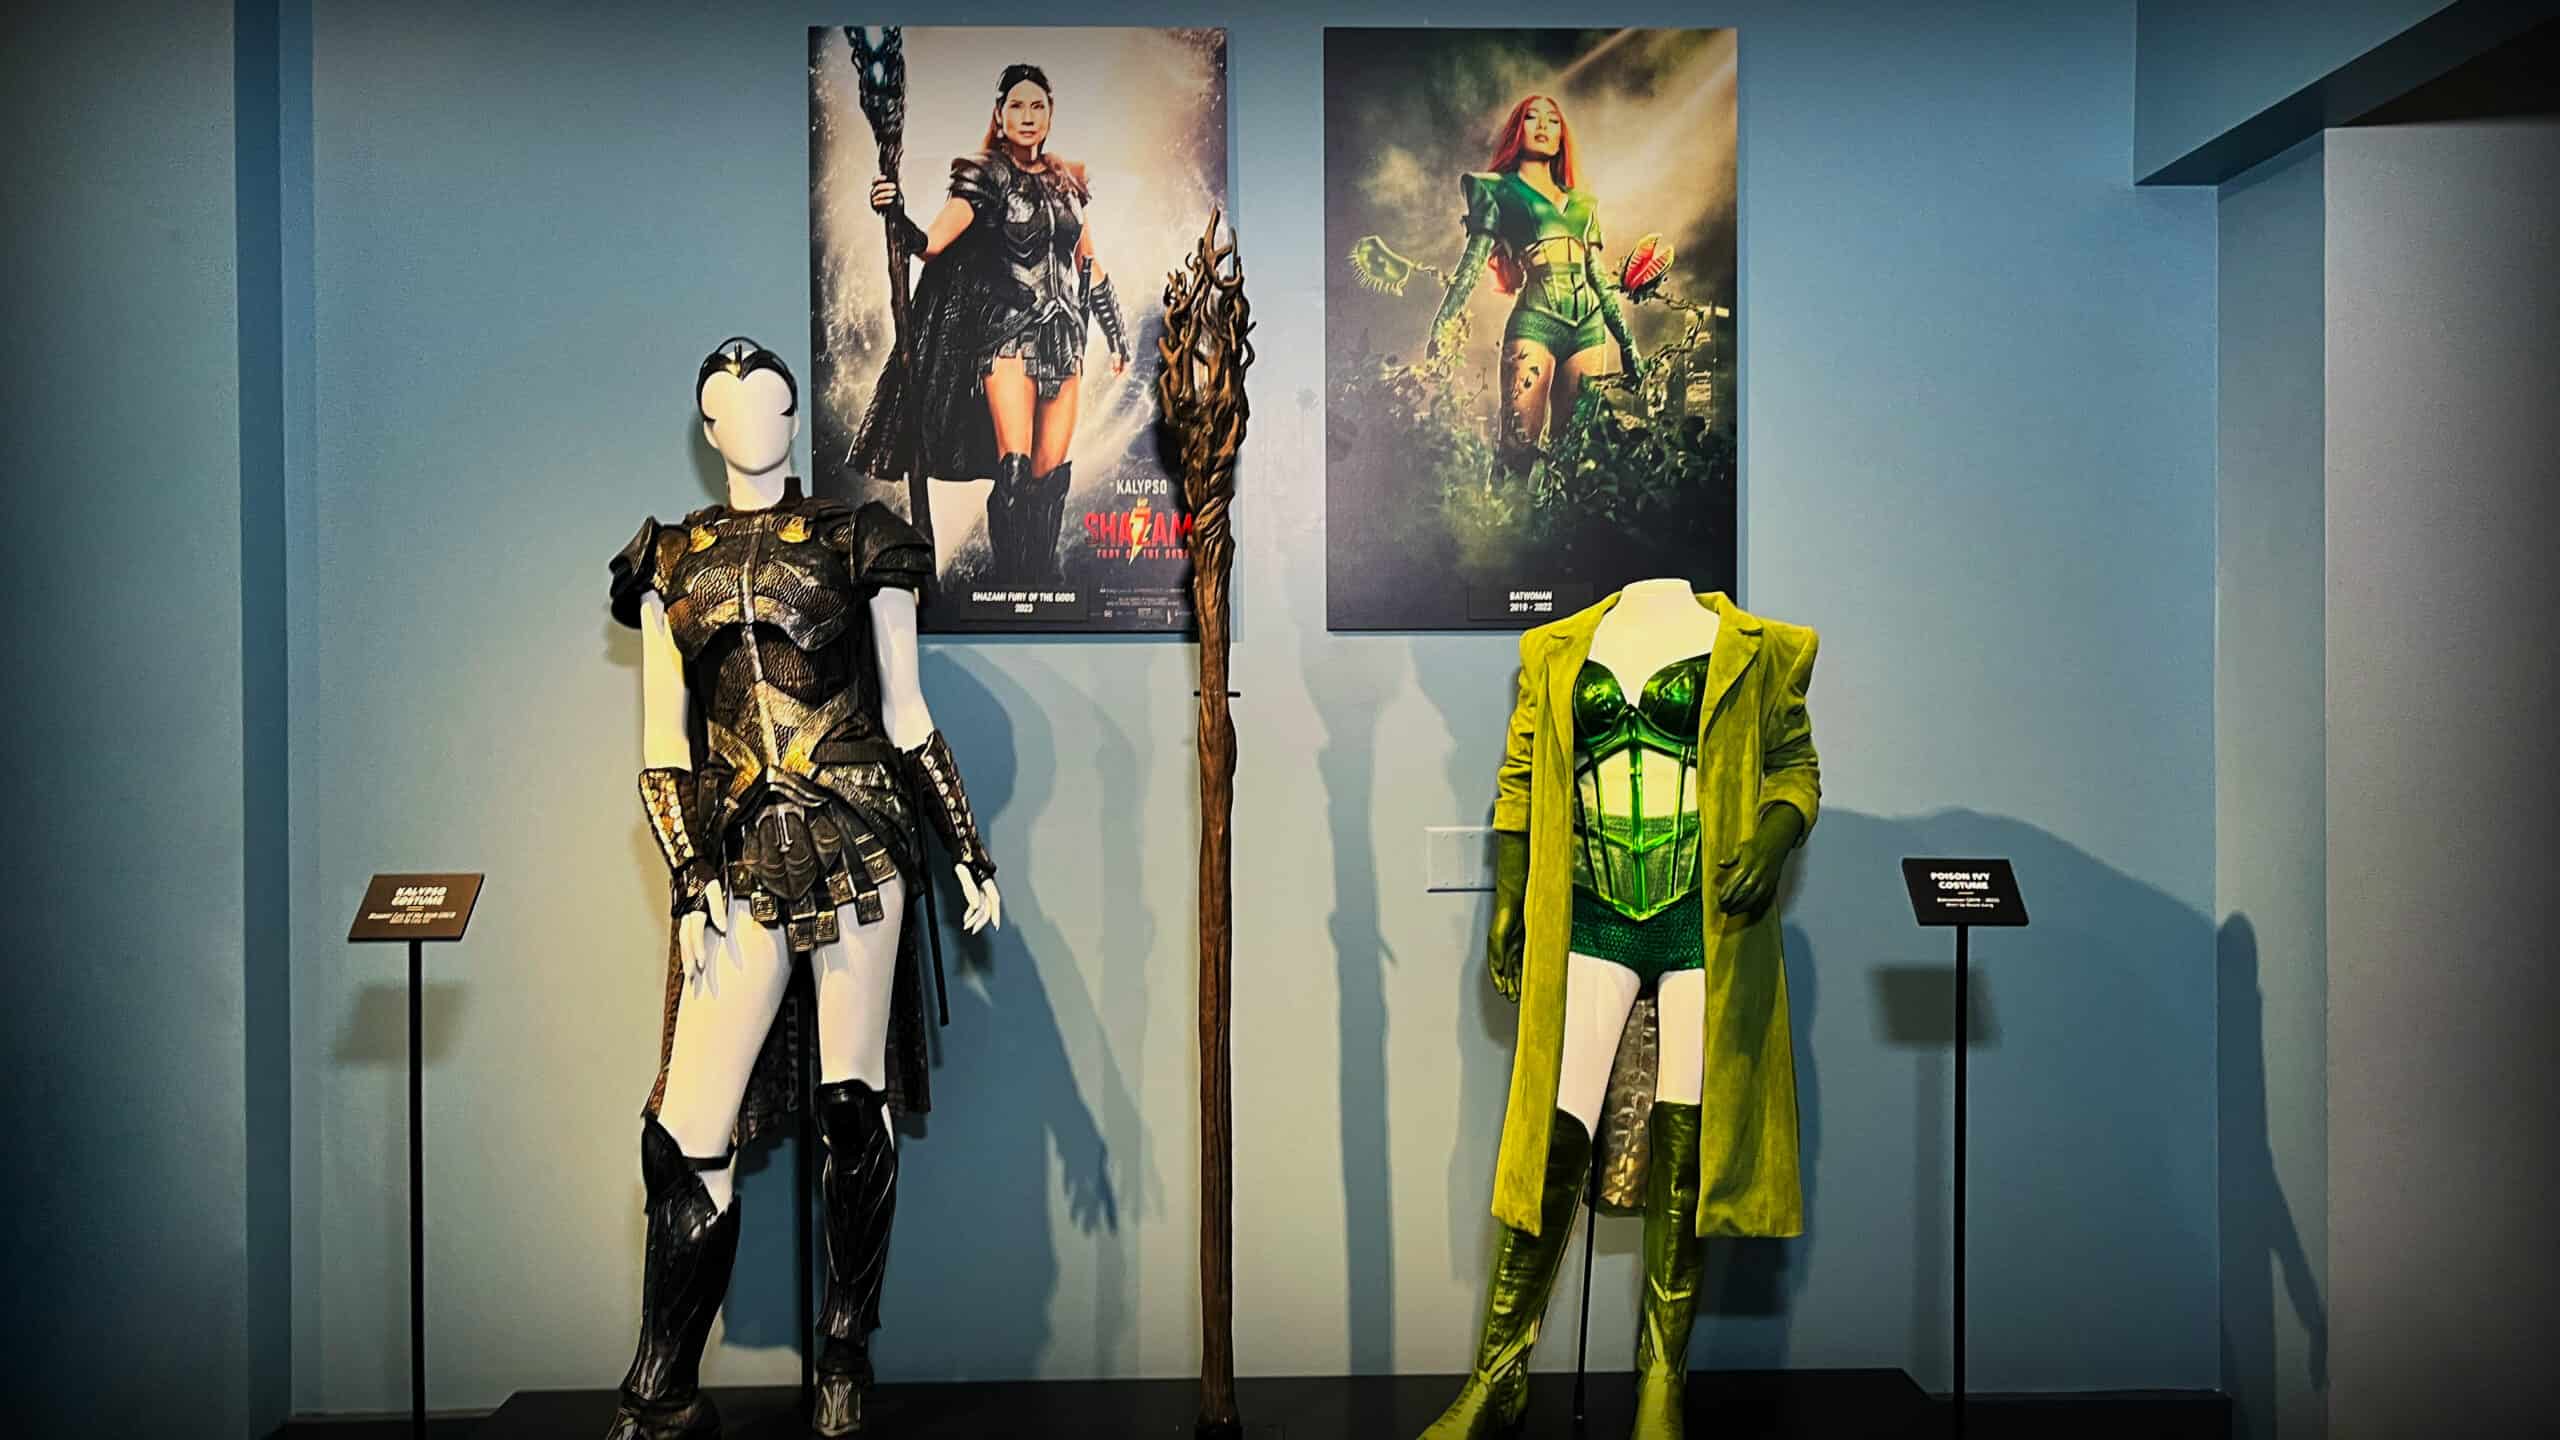 Warner Bros. Studio Tour Hollywood celebrates Asian American and Pacific Islander Heritage Month